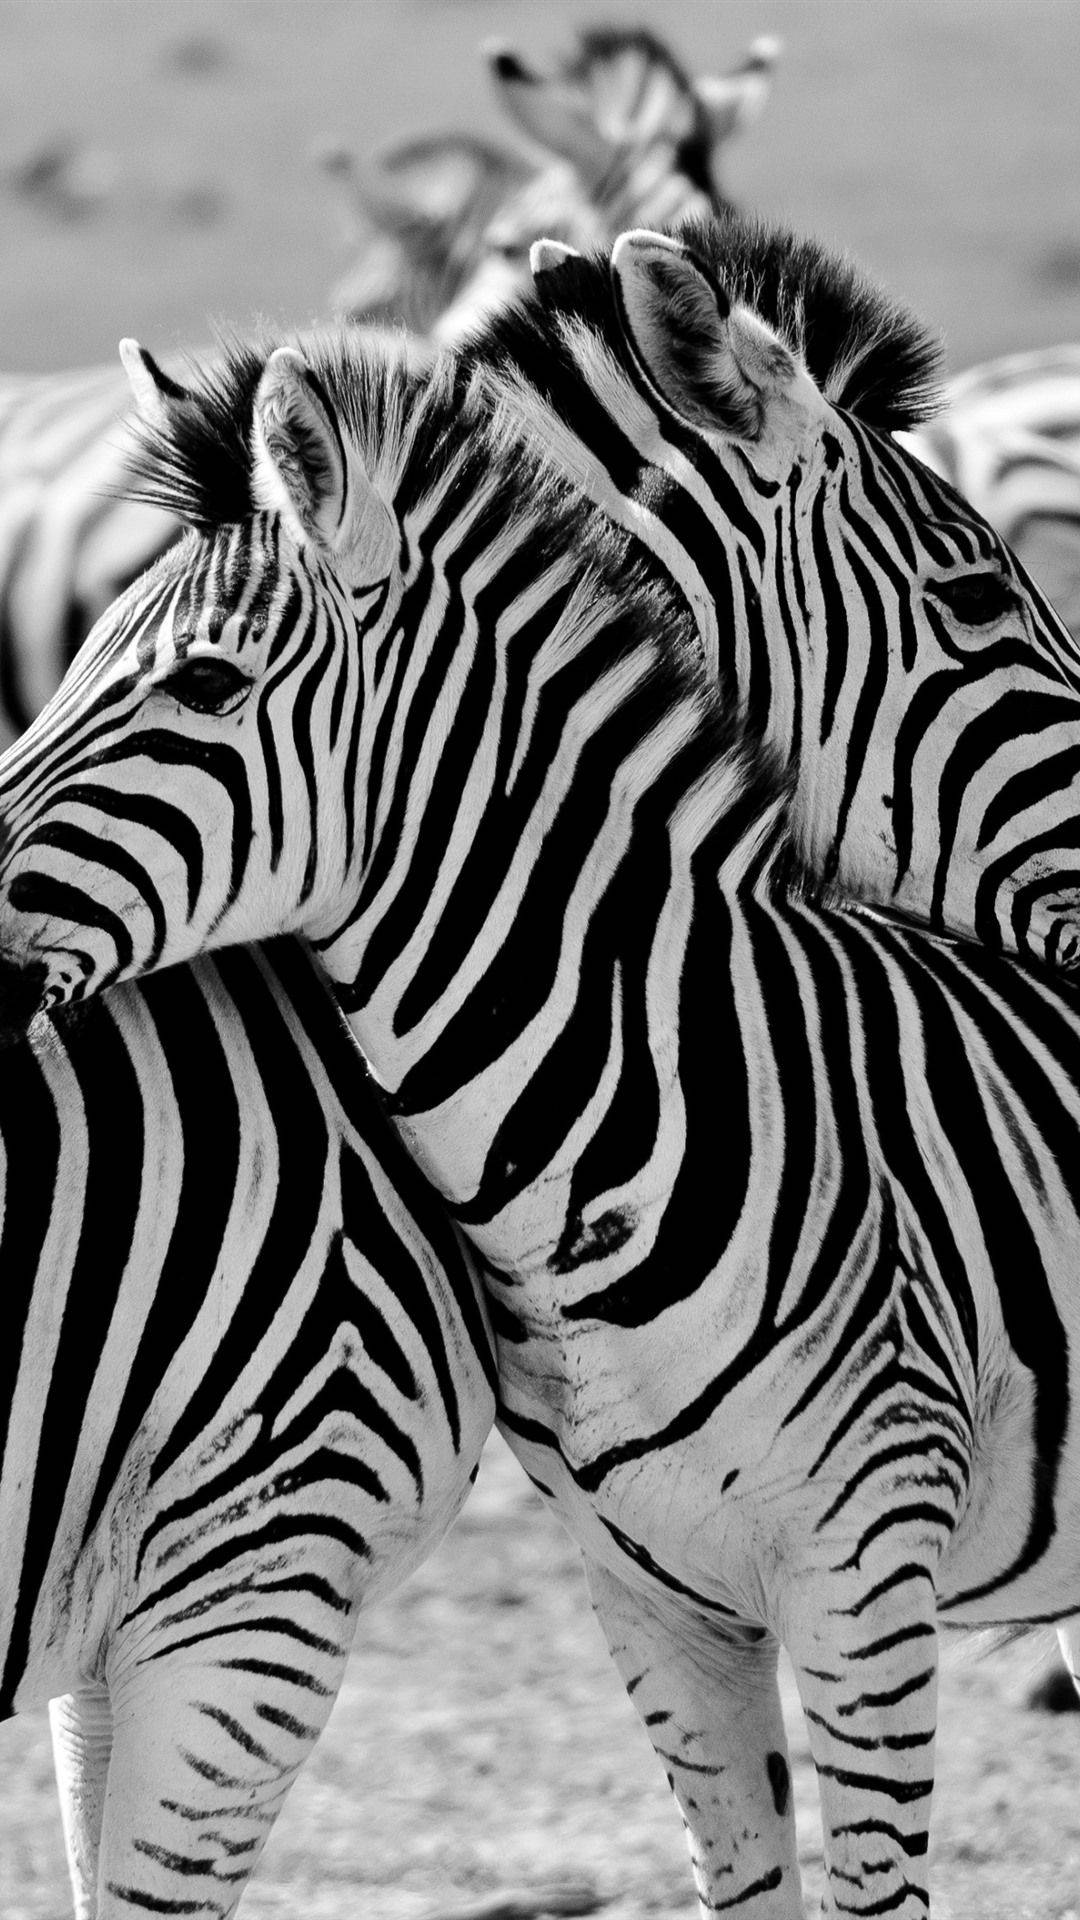 Majestic Zebras In The Wild African Plains With An Iphone Background